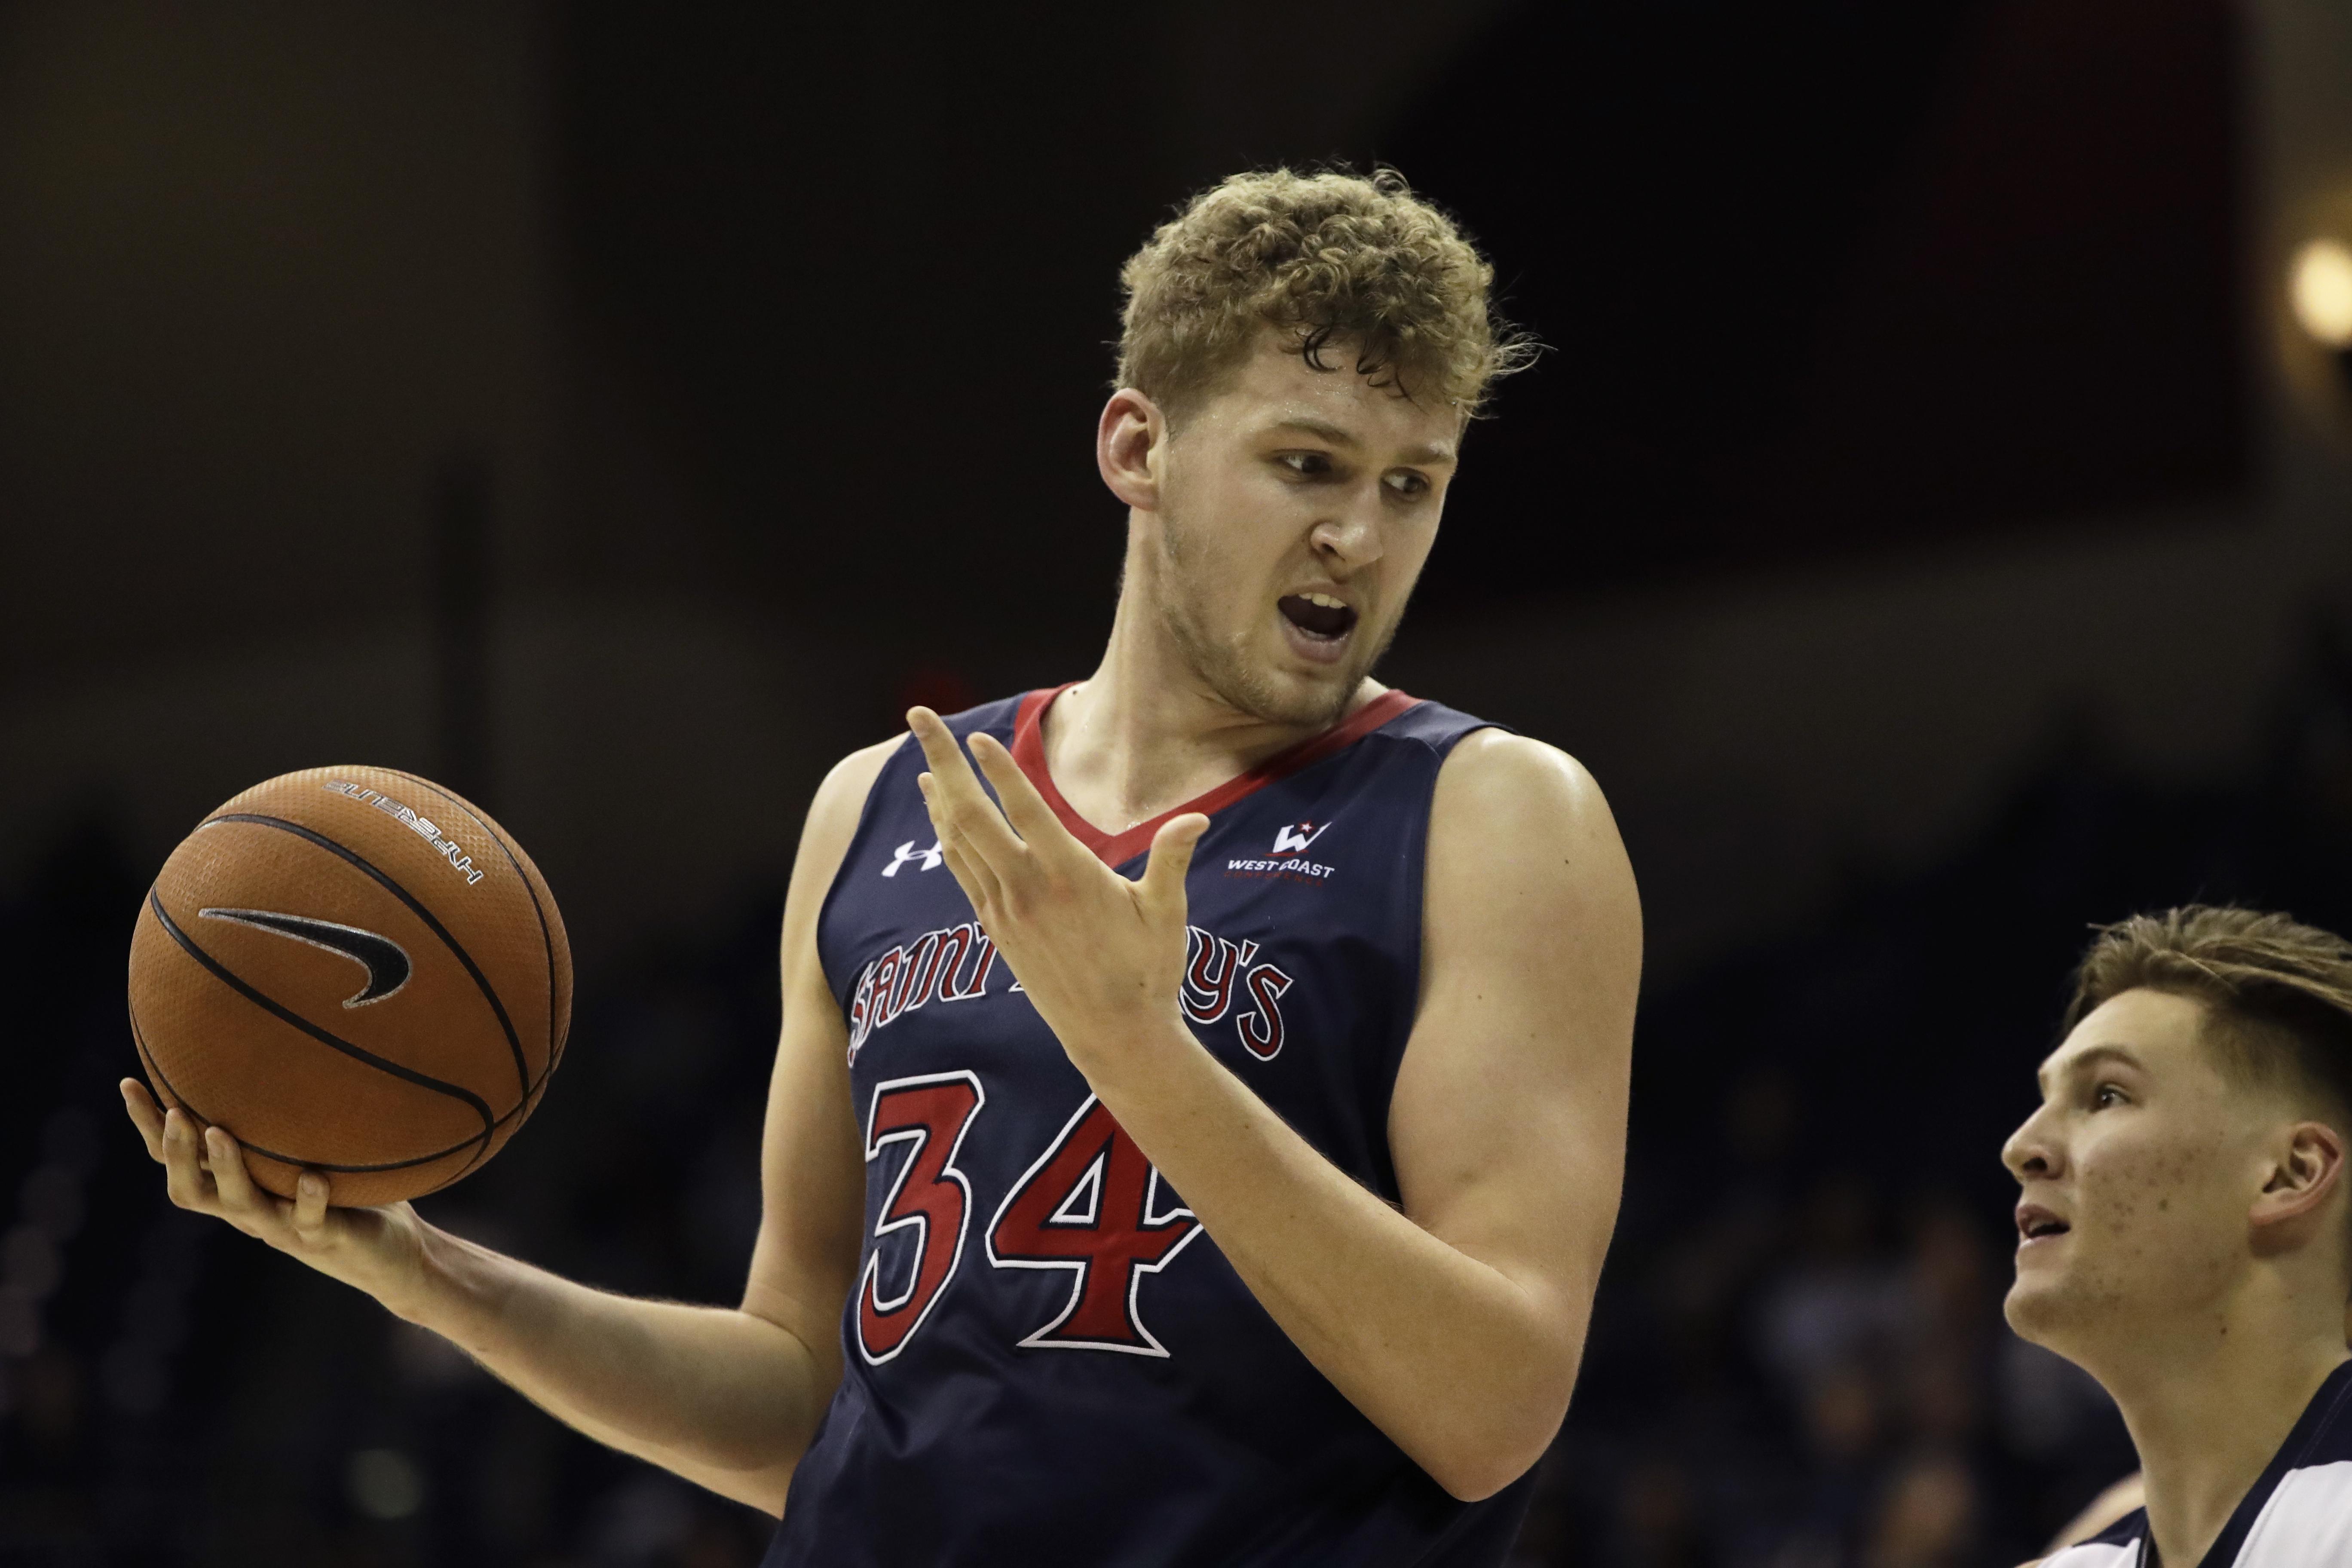 Saint Mary’s center Jock Landale has been matchup nightmare for